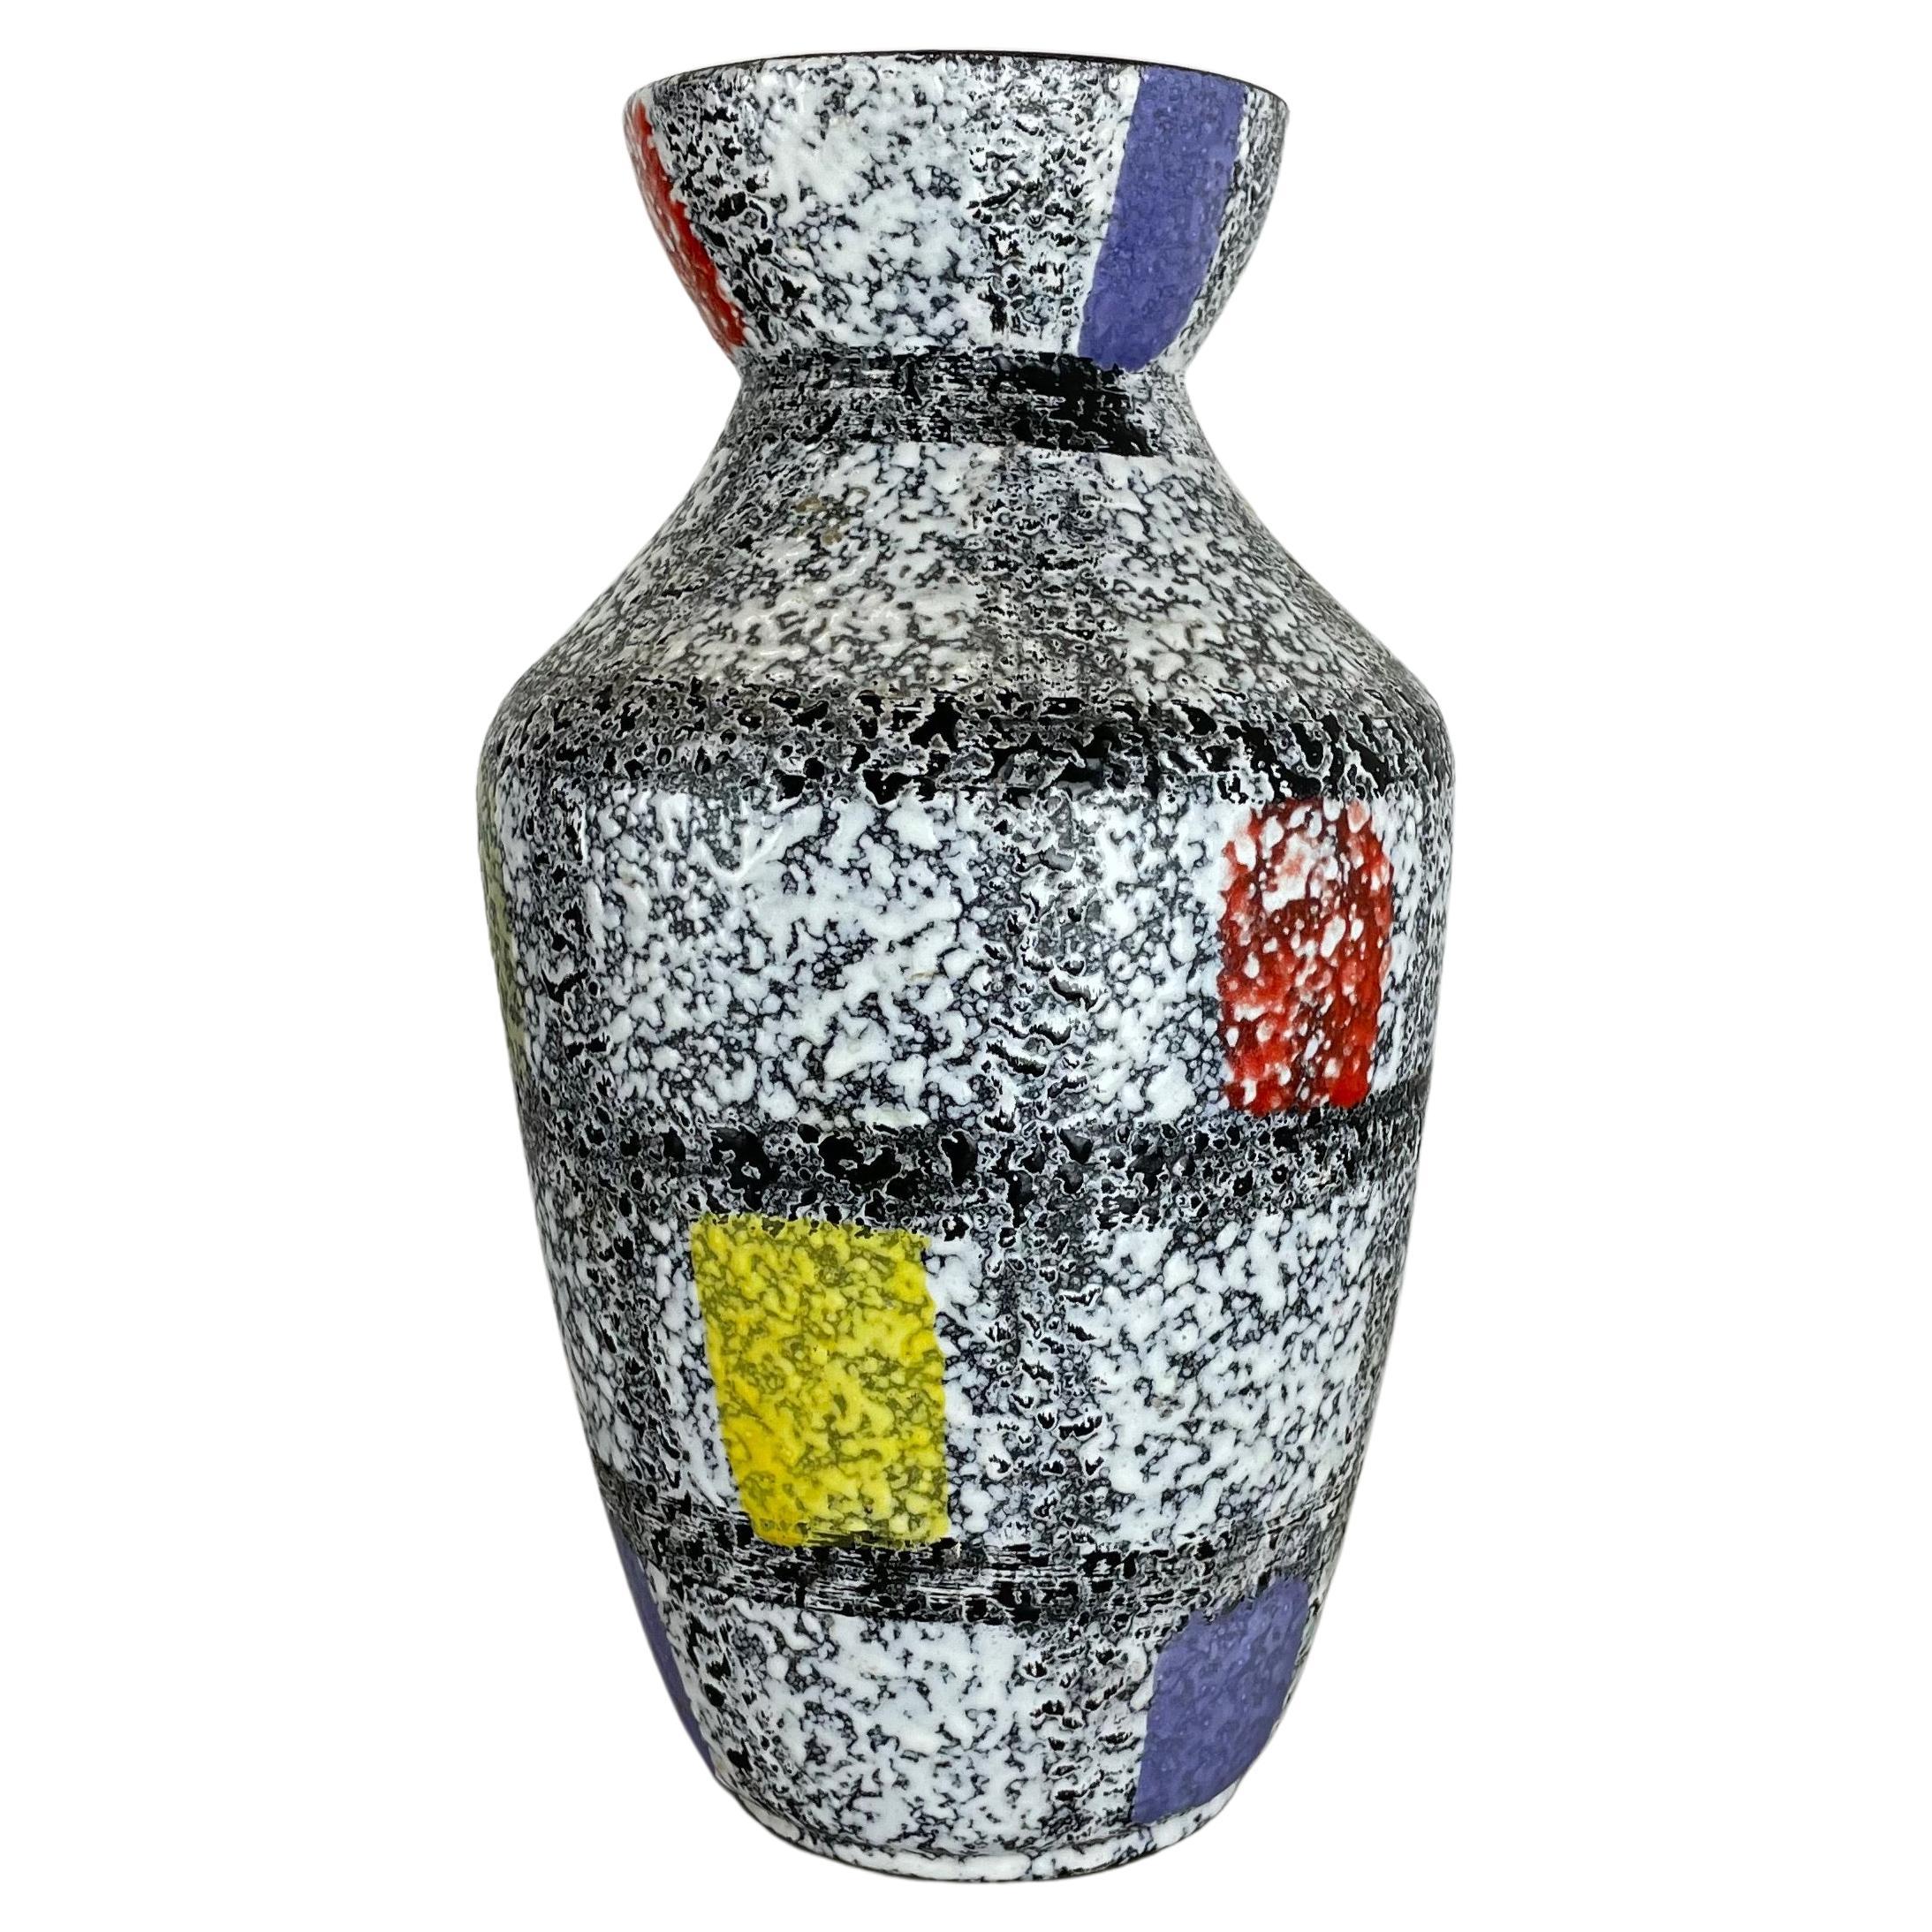 Super Colorful Fat Lava Pottery "575 25" Vase by Bay Ceramics, Germany, 1950s For Sale